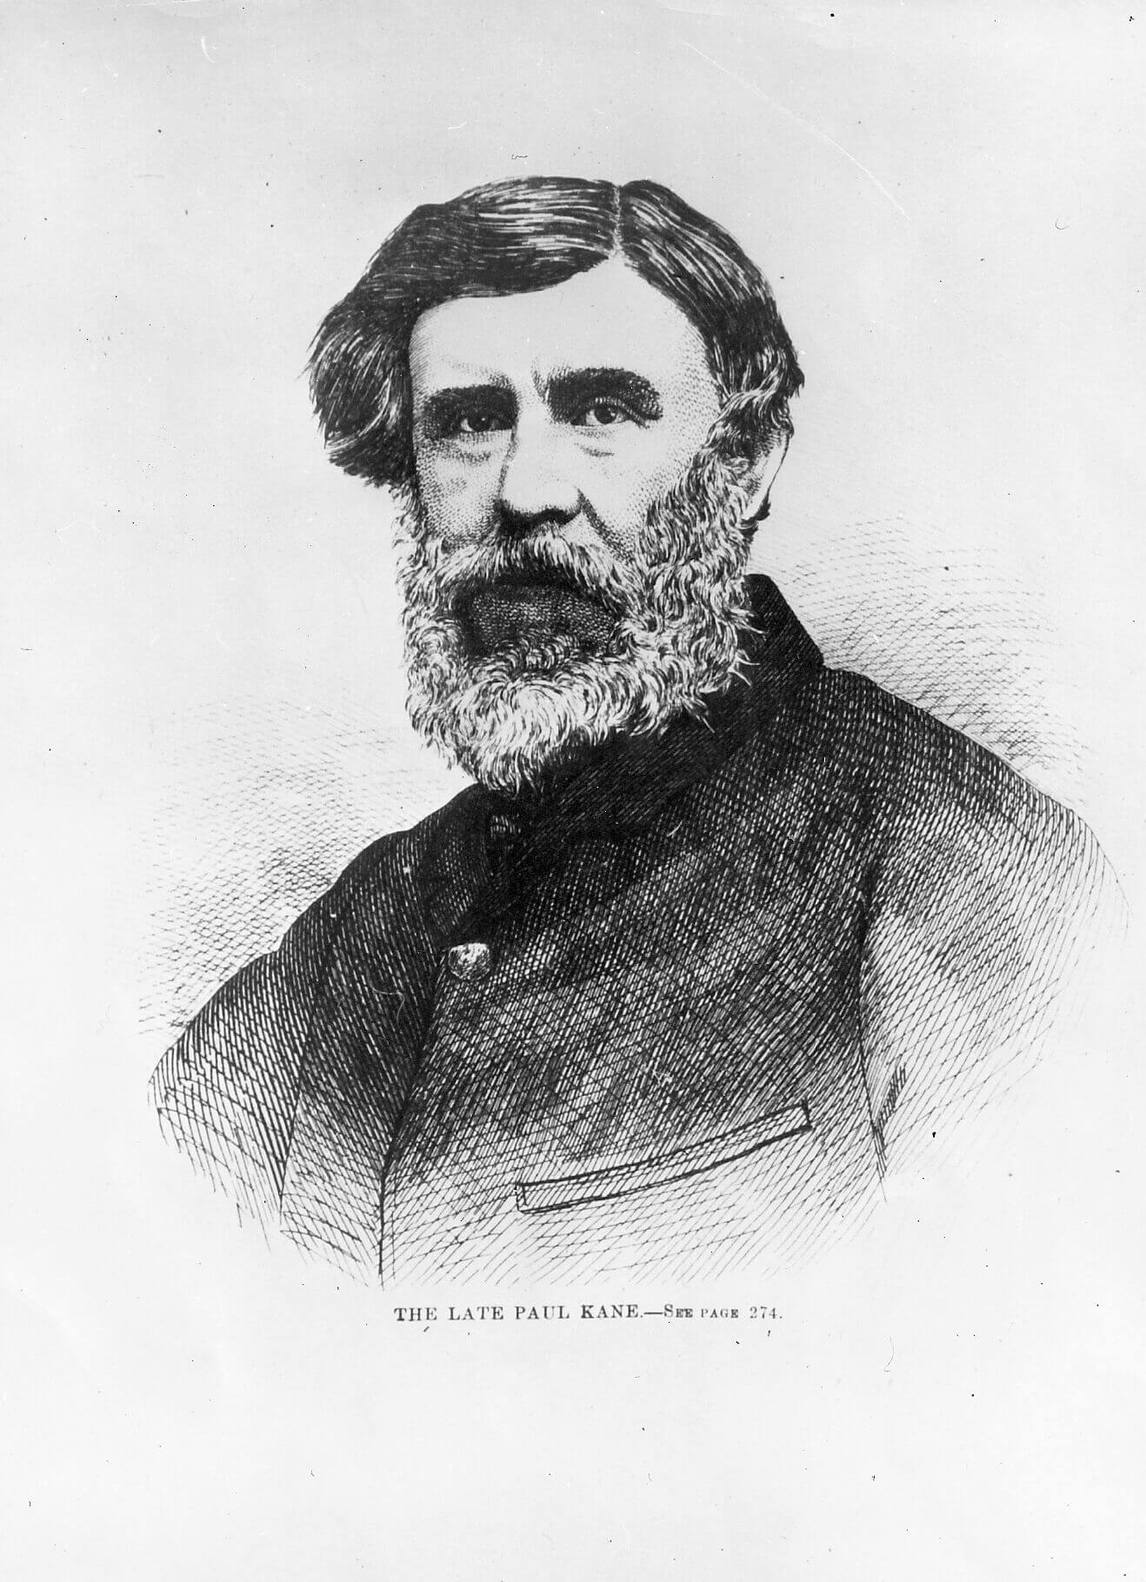 Art Canada Institute, Paul Kane, Newspaper portrait of the late Paul Kane, published in Canadian Illustrated News, October 28, 1871